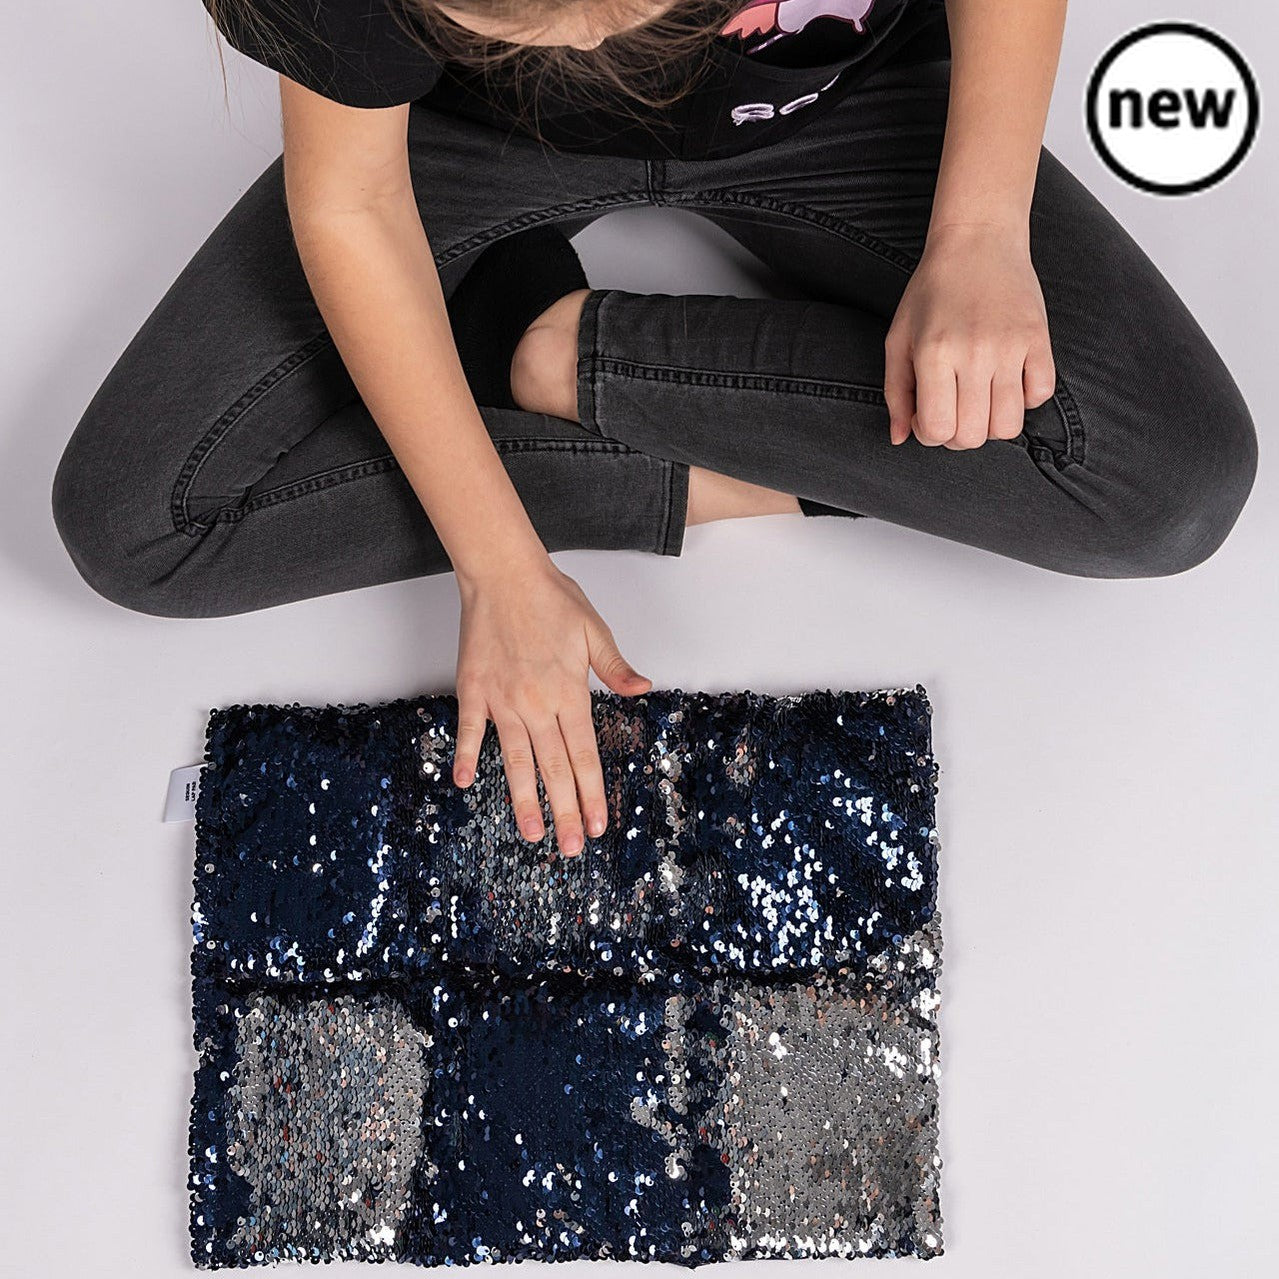 Two-Tone Sequin Weighted Lap Pillow, Introducing the Two-Tone Sequin Weighted Lap Pillow—an innovative sensory accessory designed to combine tactile pleasure with deep-pressure input for a calming and engaging experience. Key Features: Dual-Sided Design: One side features captivating two-tone sequin fabric in navy blue, black, or pink, providing visual and tactile stimulation. The other side offers the calming effect of weighted pressure. Compact Size: With dimensions of 40cm x 30cm, this lap pillow is conv